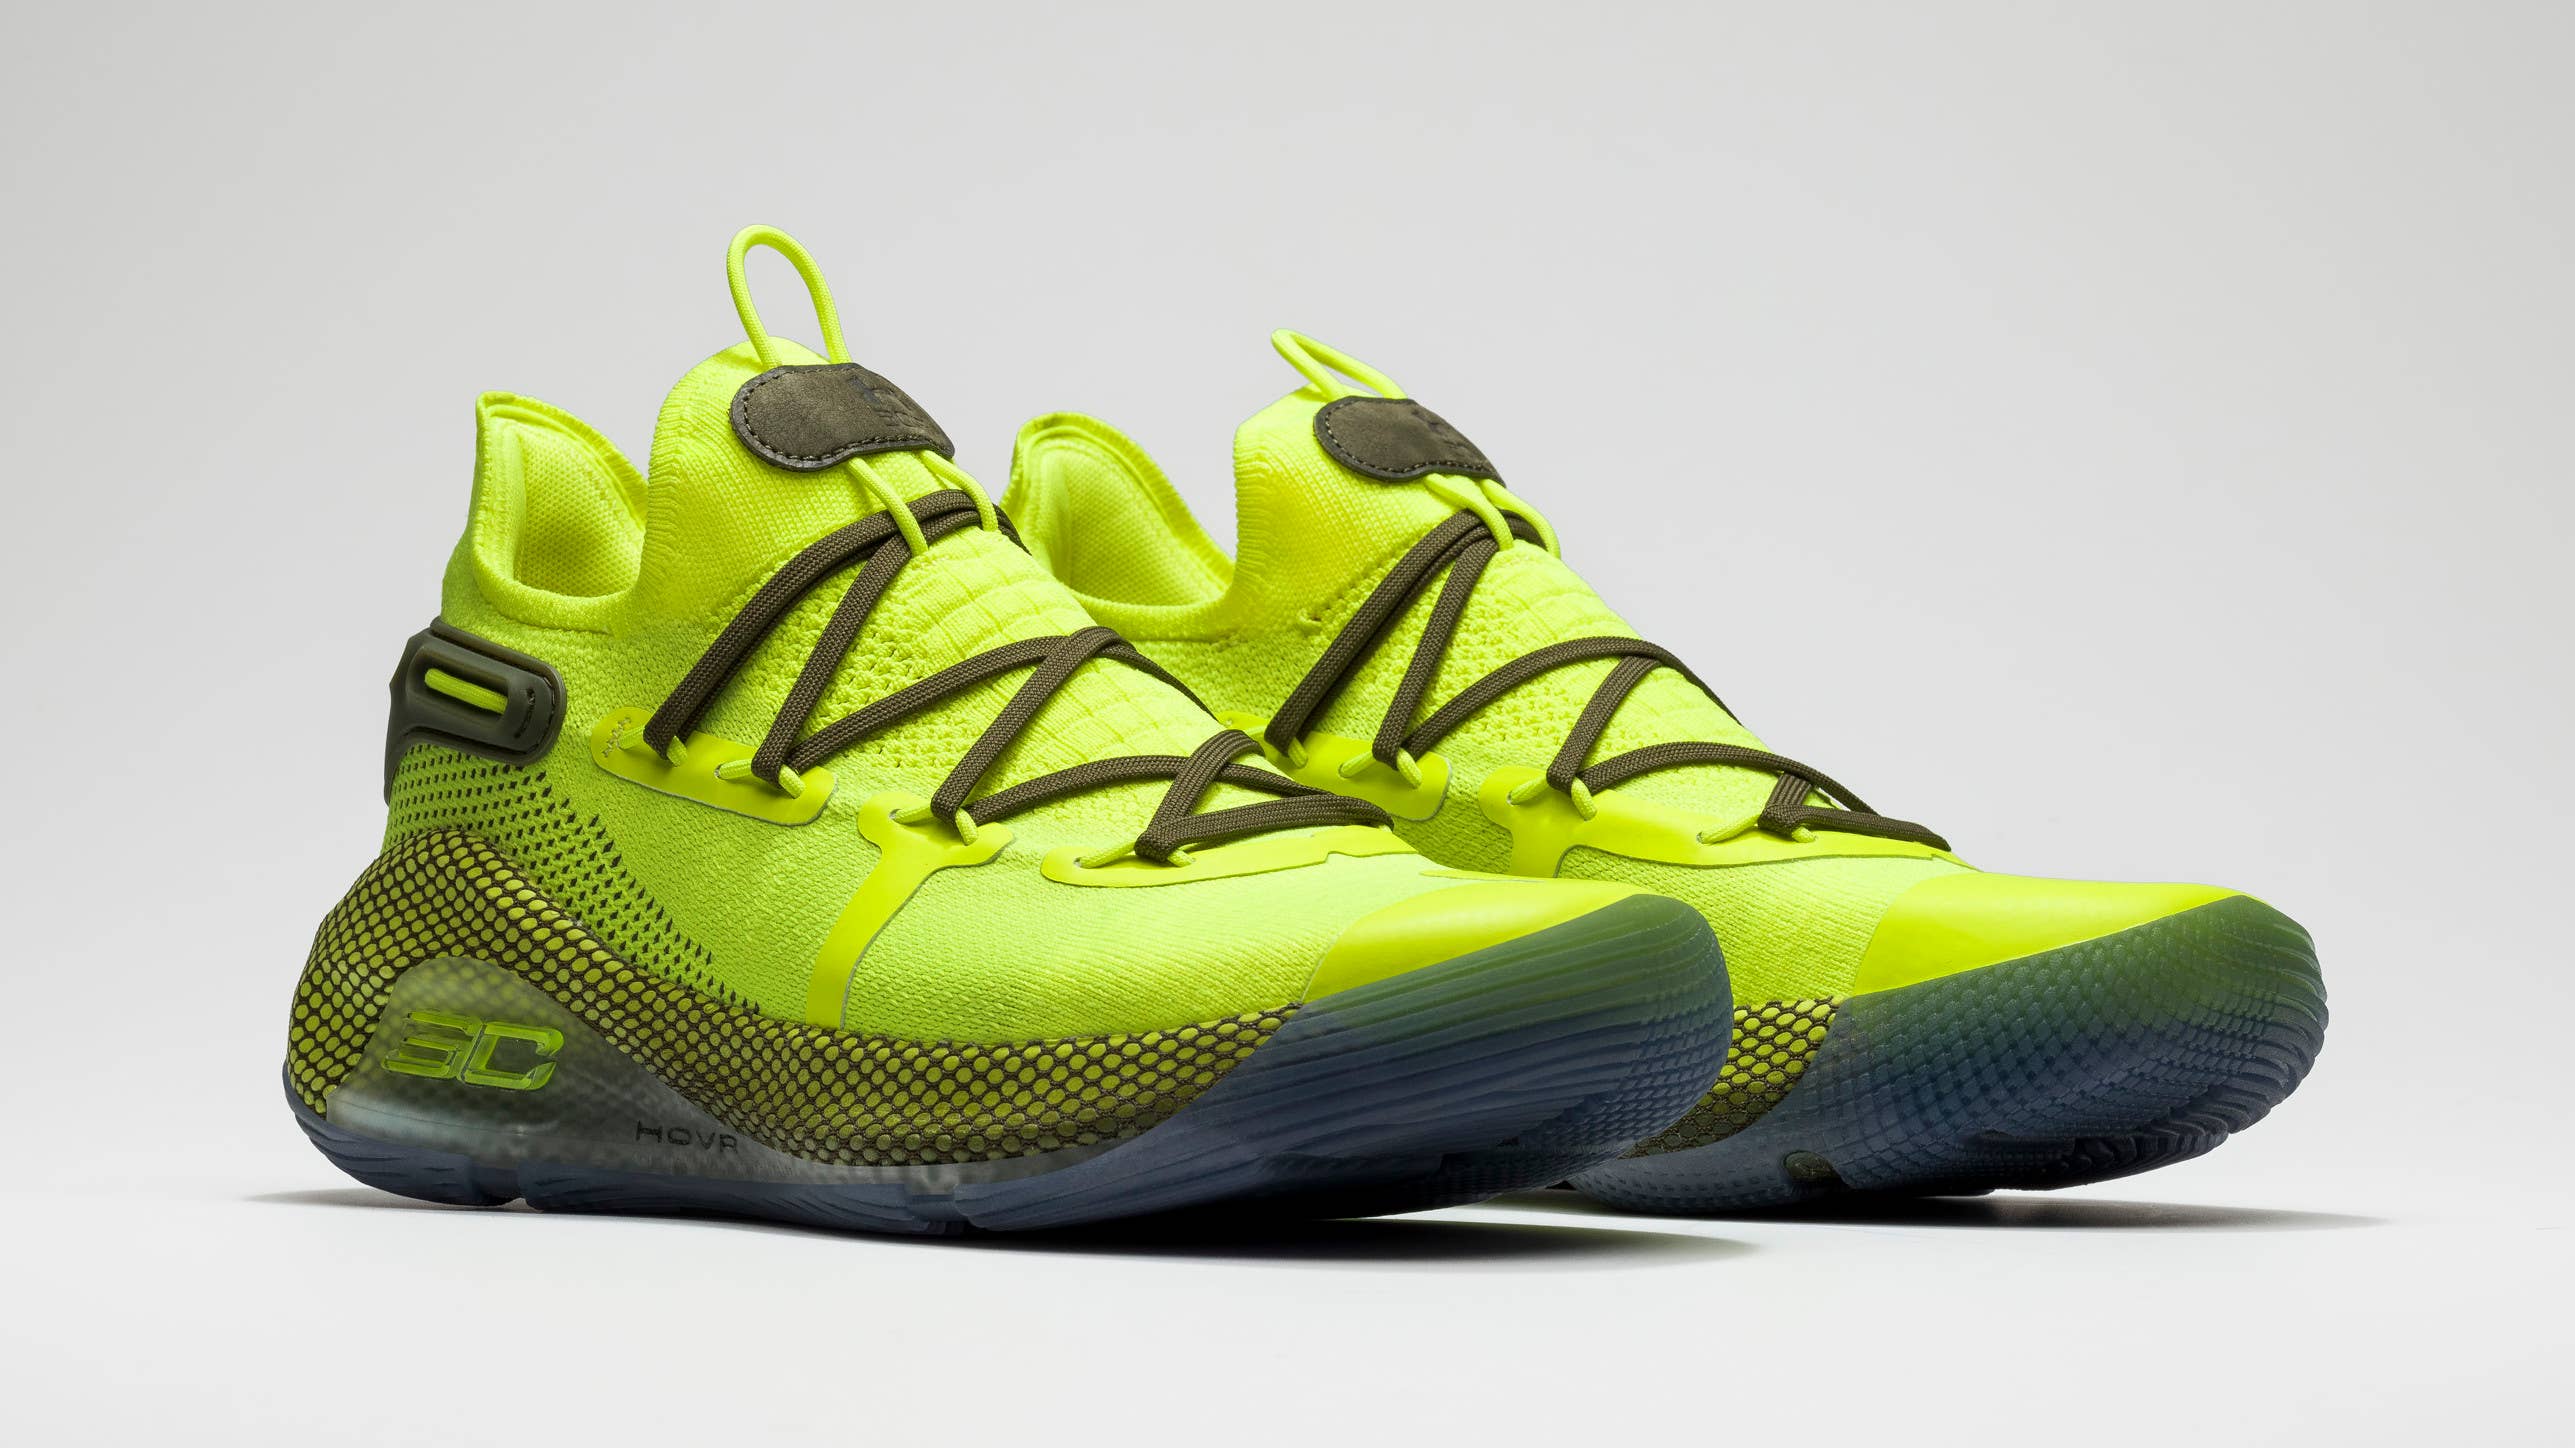 Under Armour Curry 6 All Star 'Coy Fish' 3020612 302 Pair